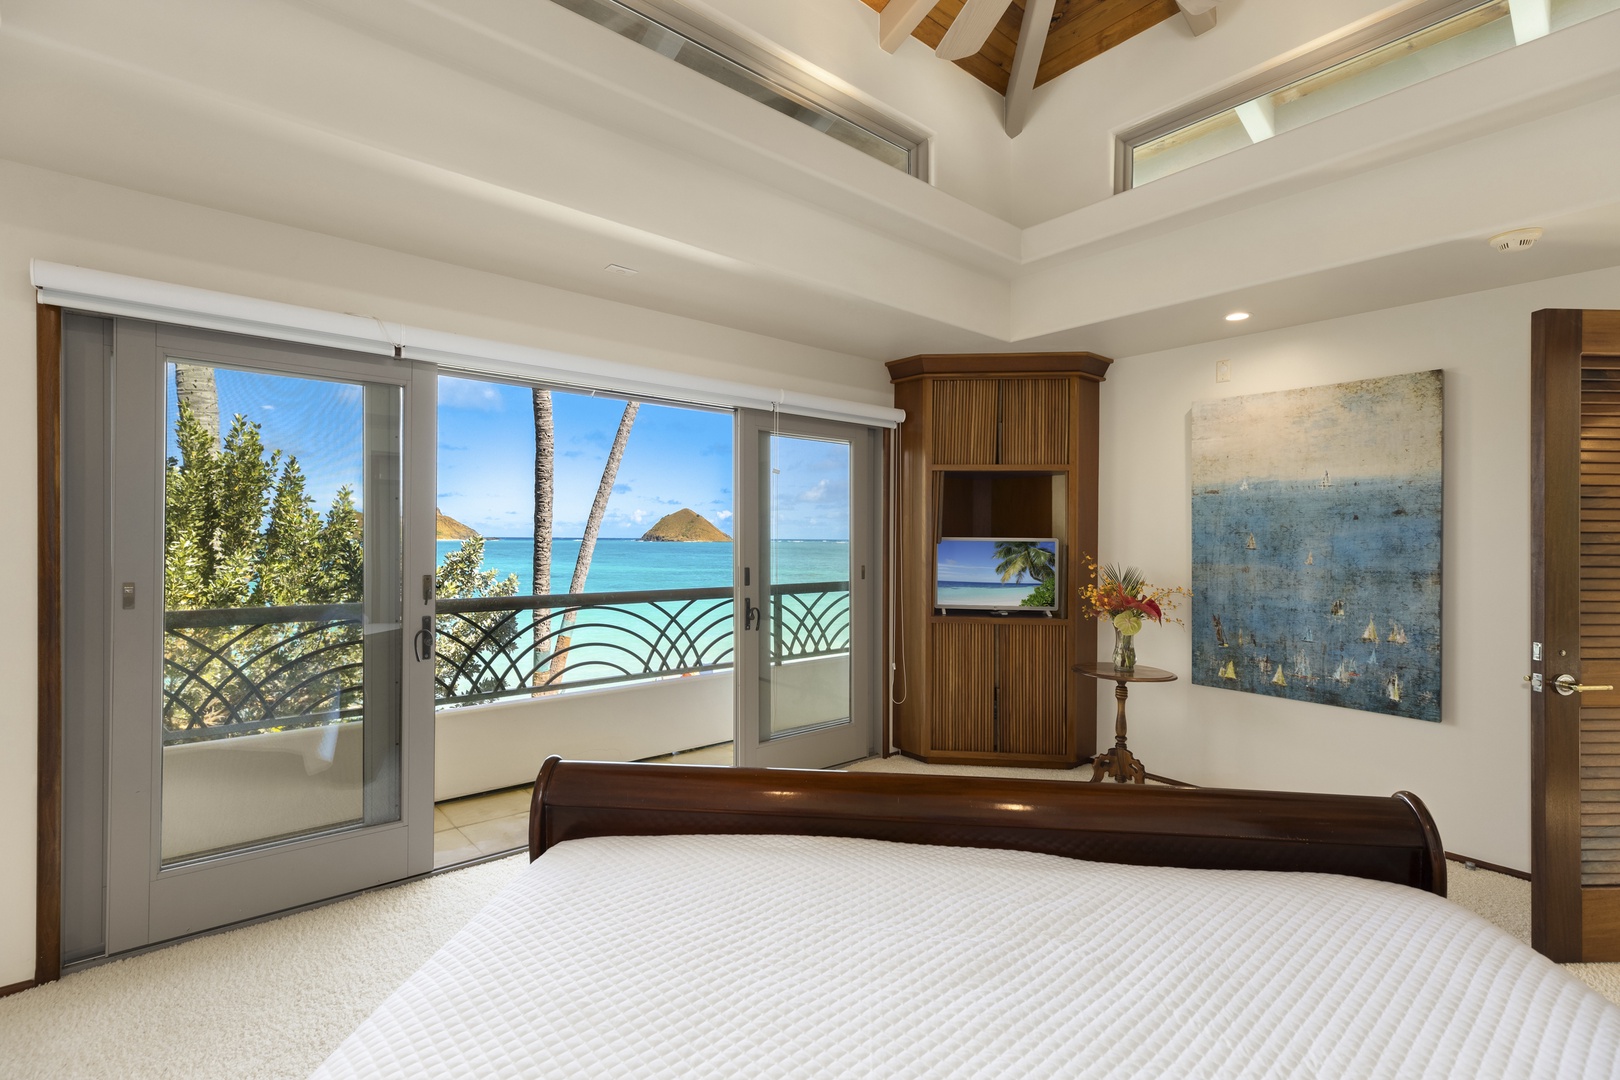 Kailua Vacation Rentals, Mokulua Sunrise - The 4 bedrooms of the villa are located on the second floor.